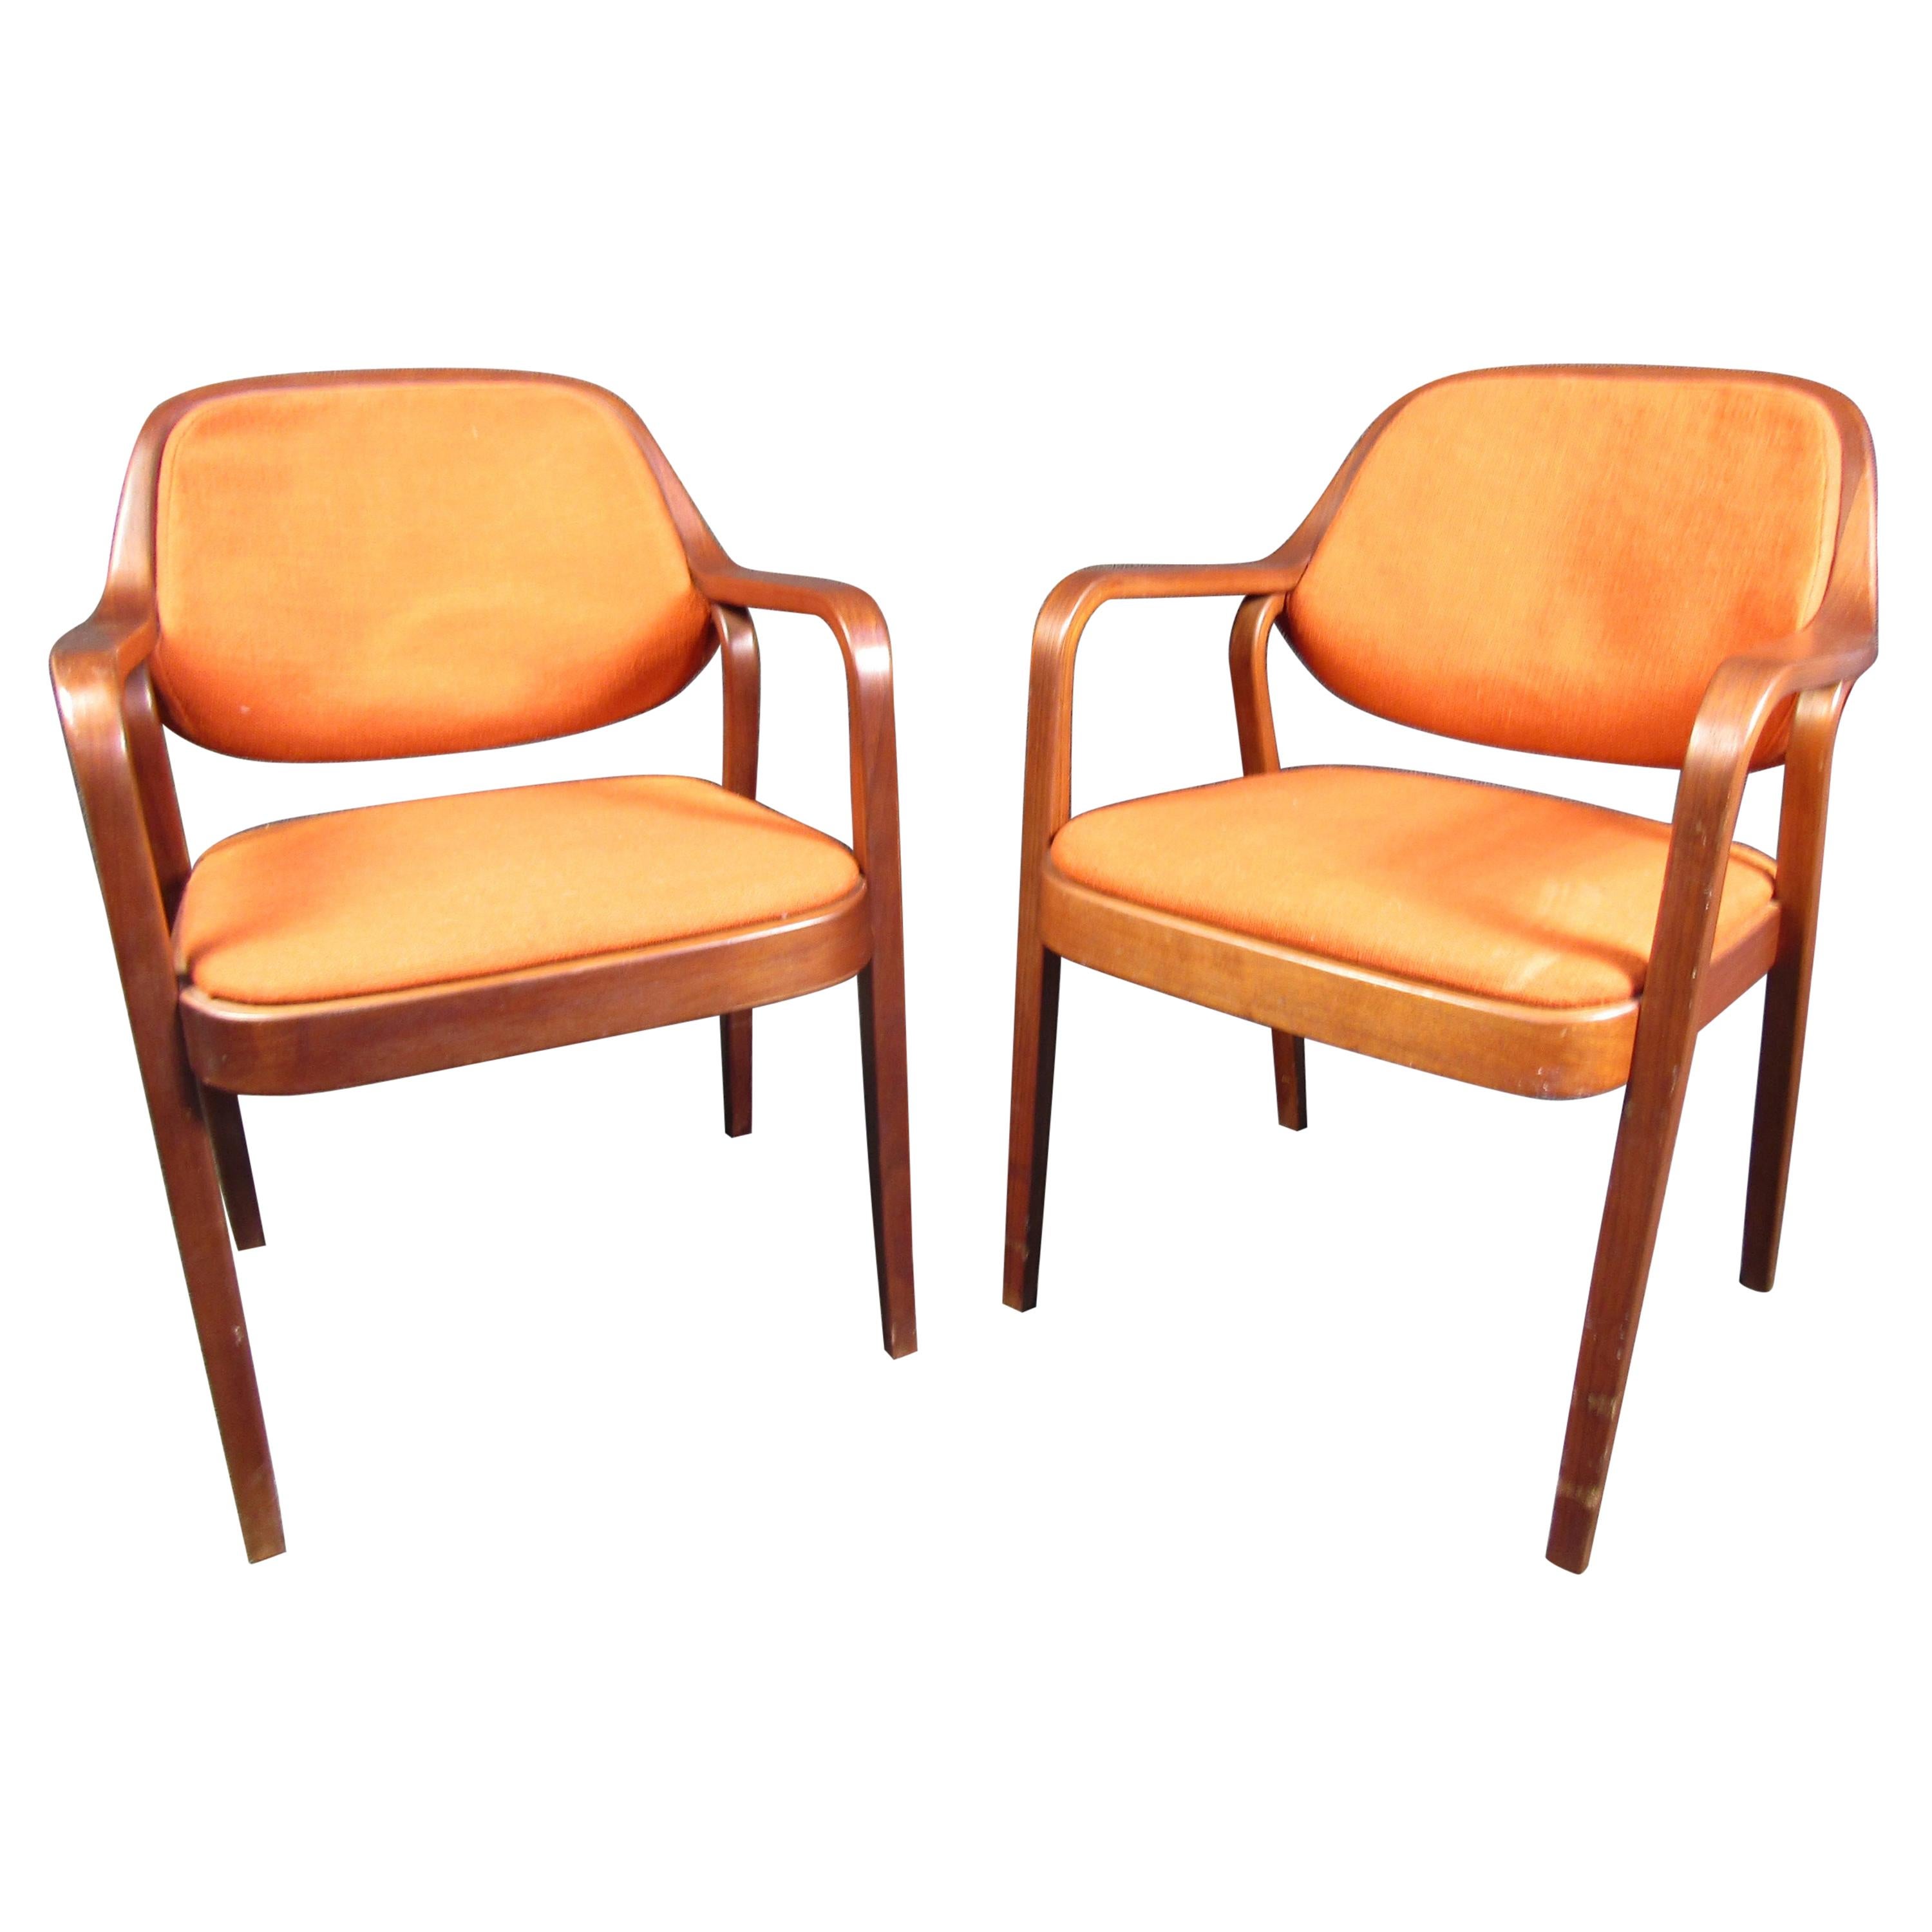 Pair of Midcentury Walnut Armchairs by Knoll